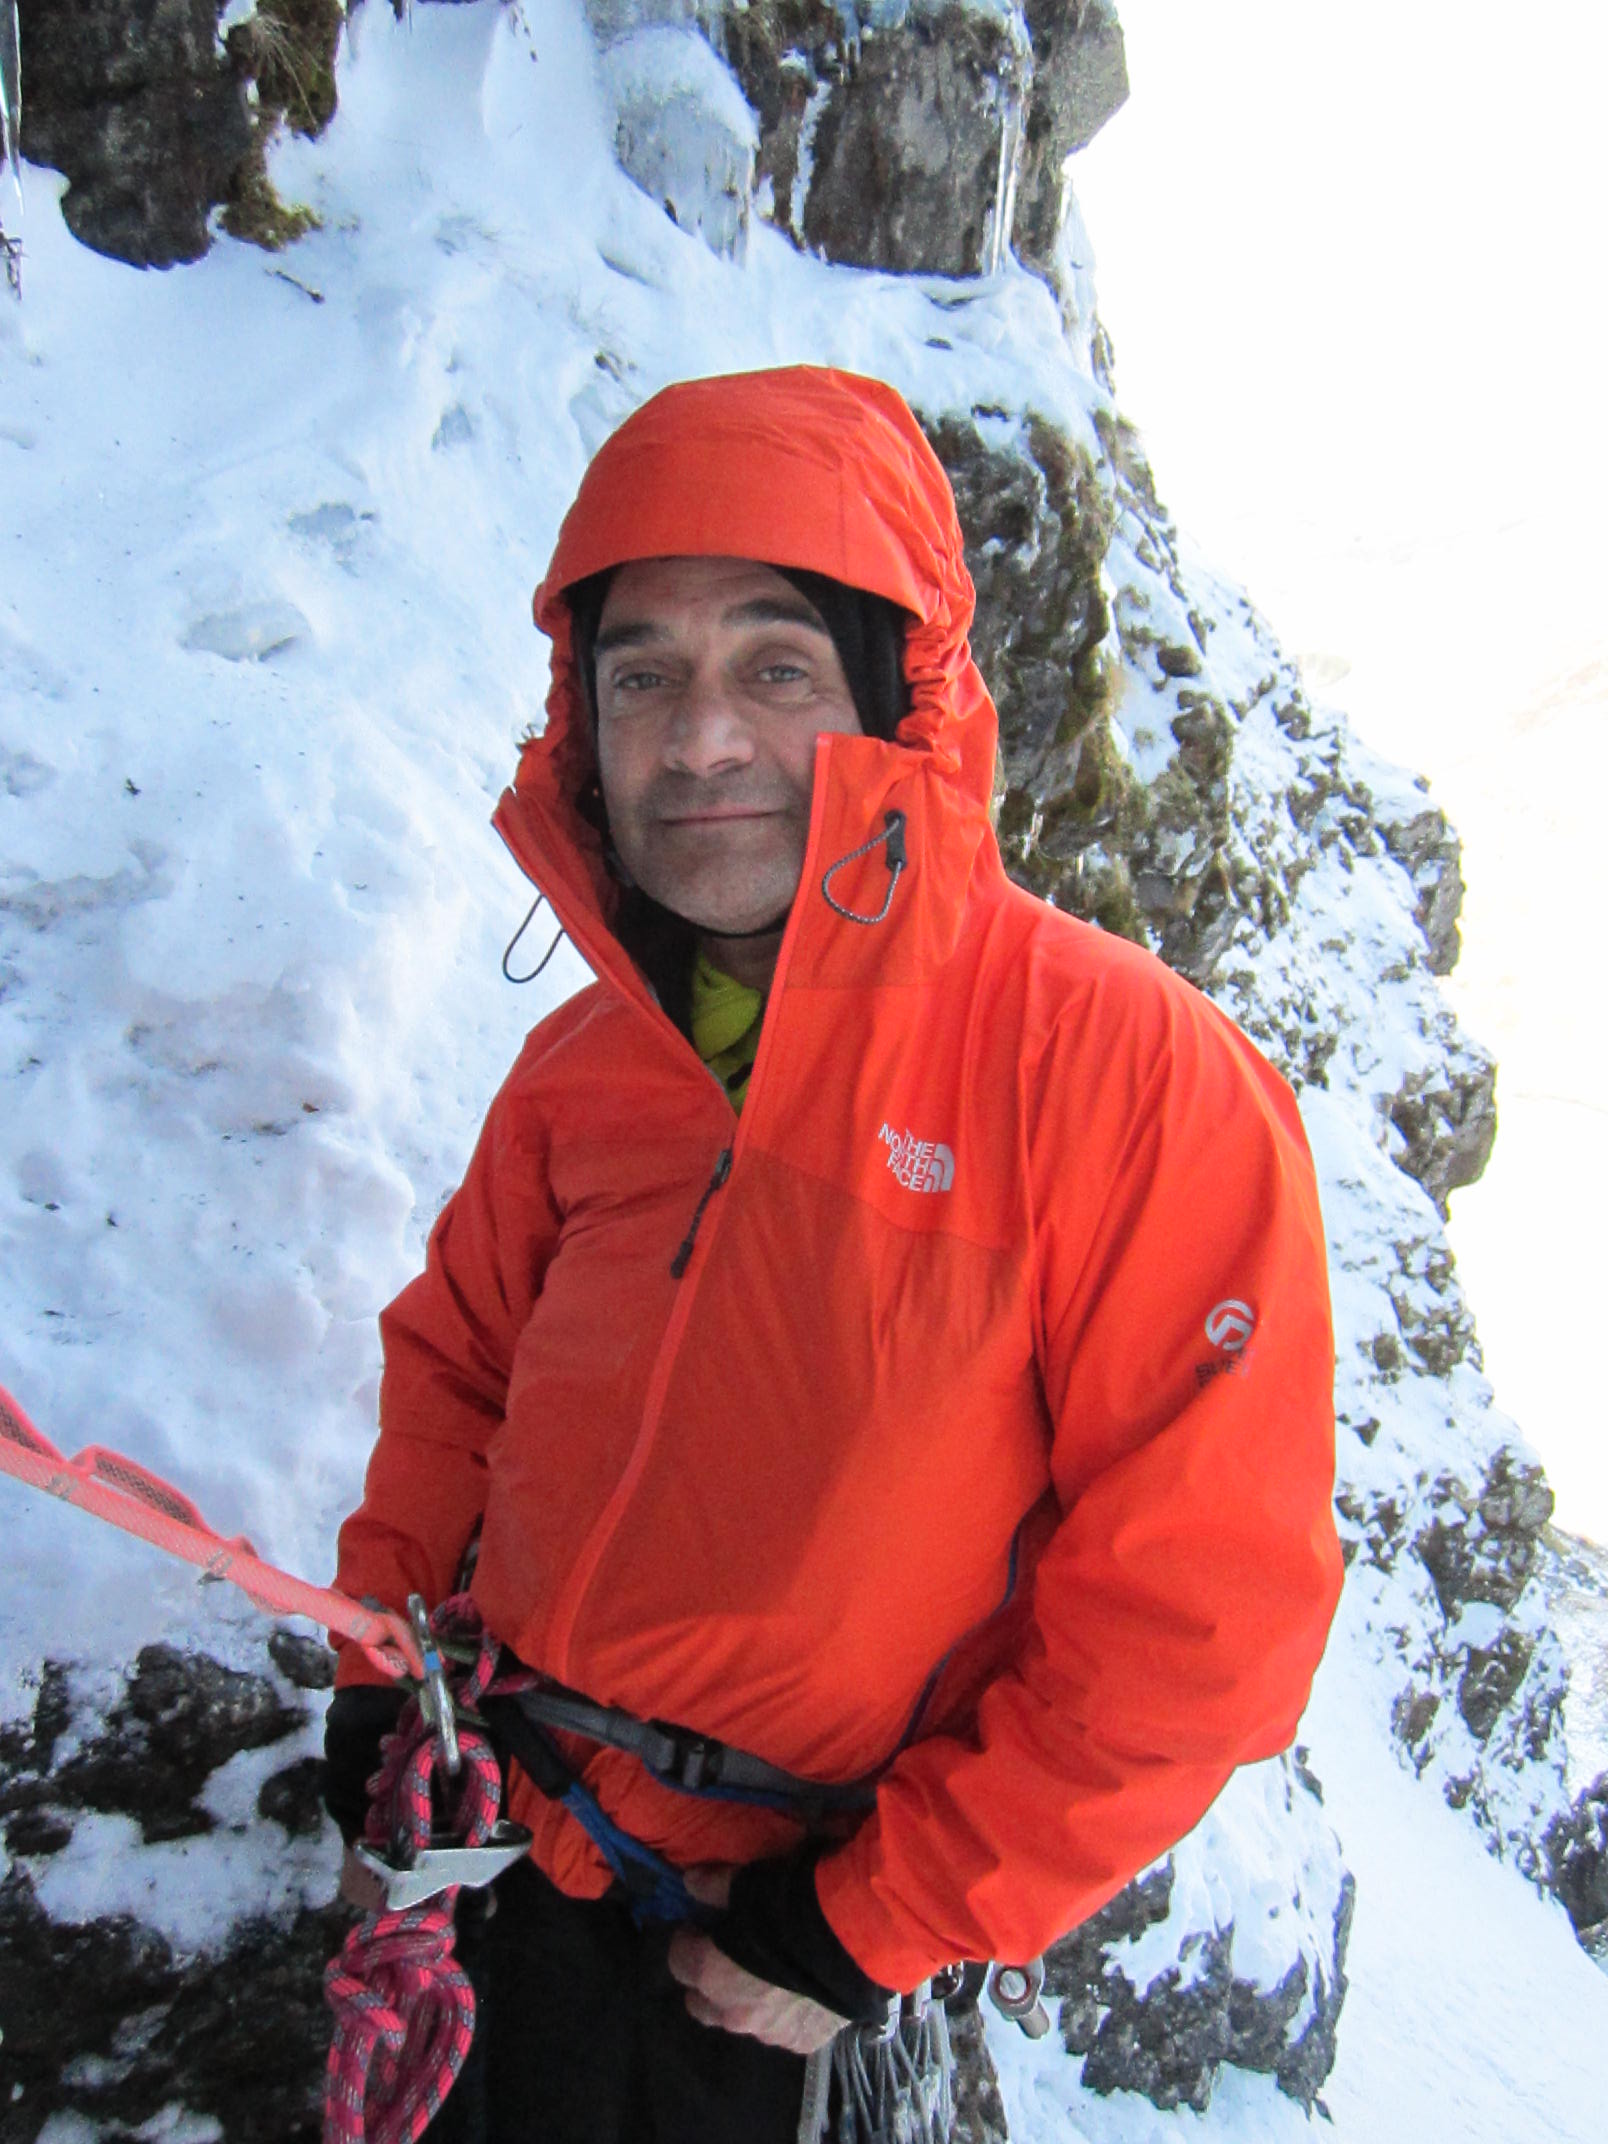 The North Face Anti-Matter Jacket – Climbing Gear Review